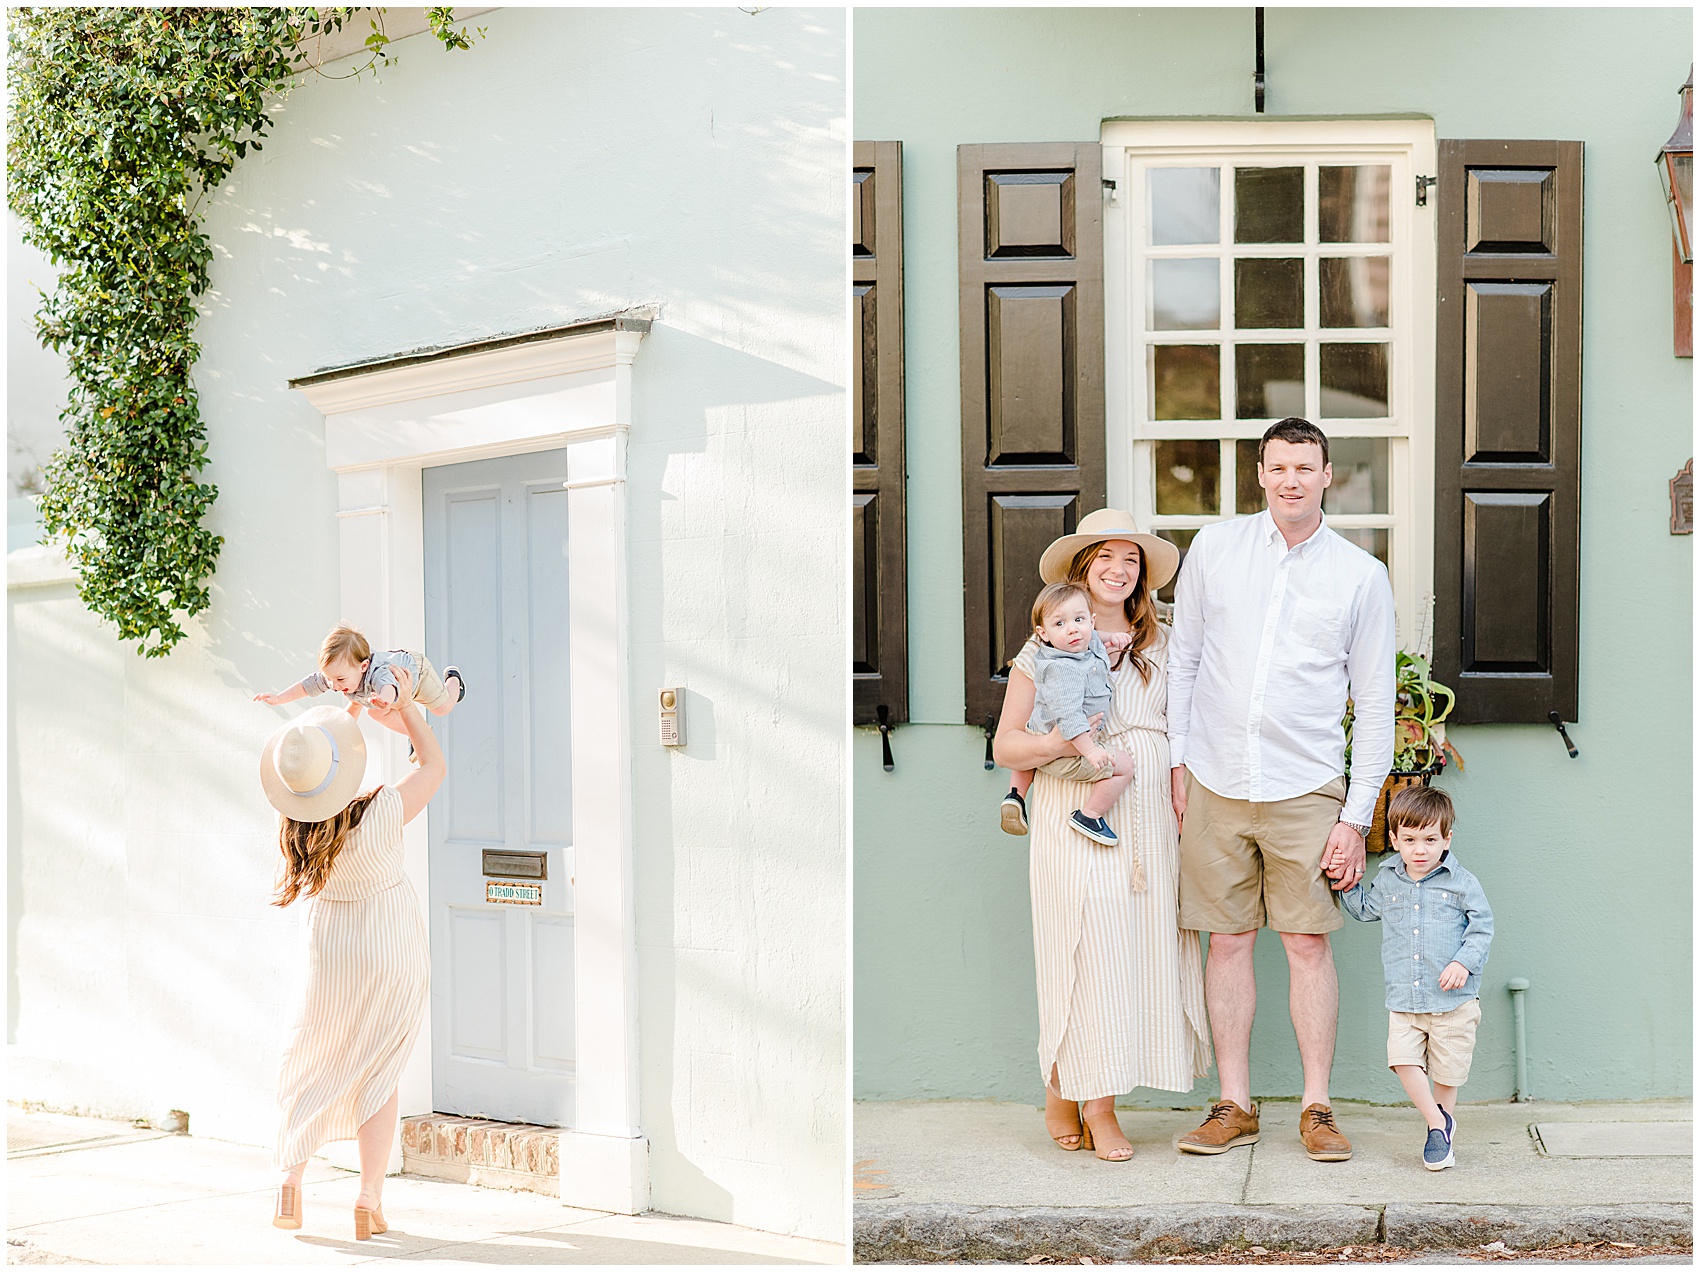 south of broad downtown Charlestion Folly Beach charleston wedding photographer session Lowcountry Charleston SC wedding Photographer_1989.jpg